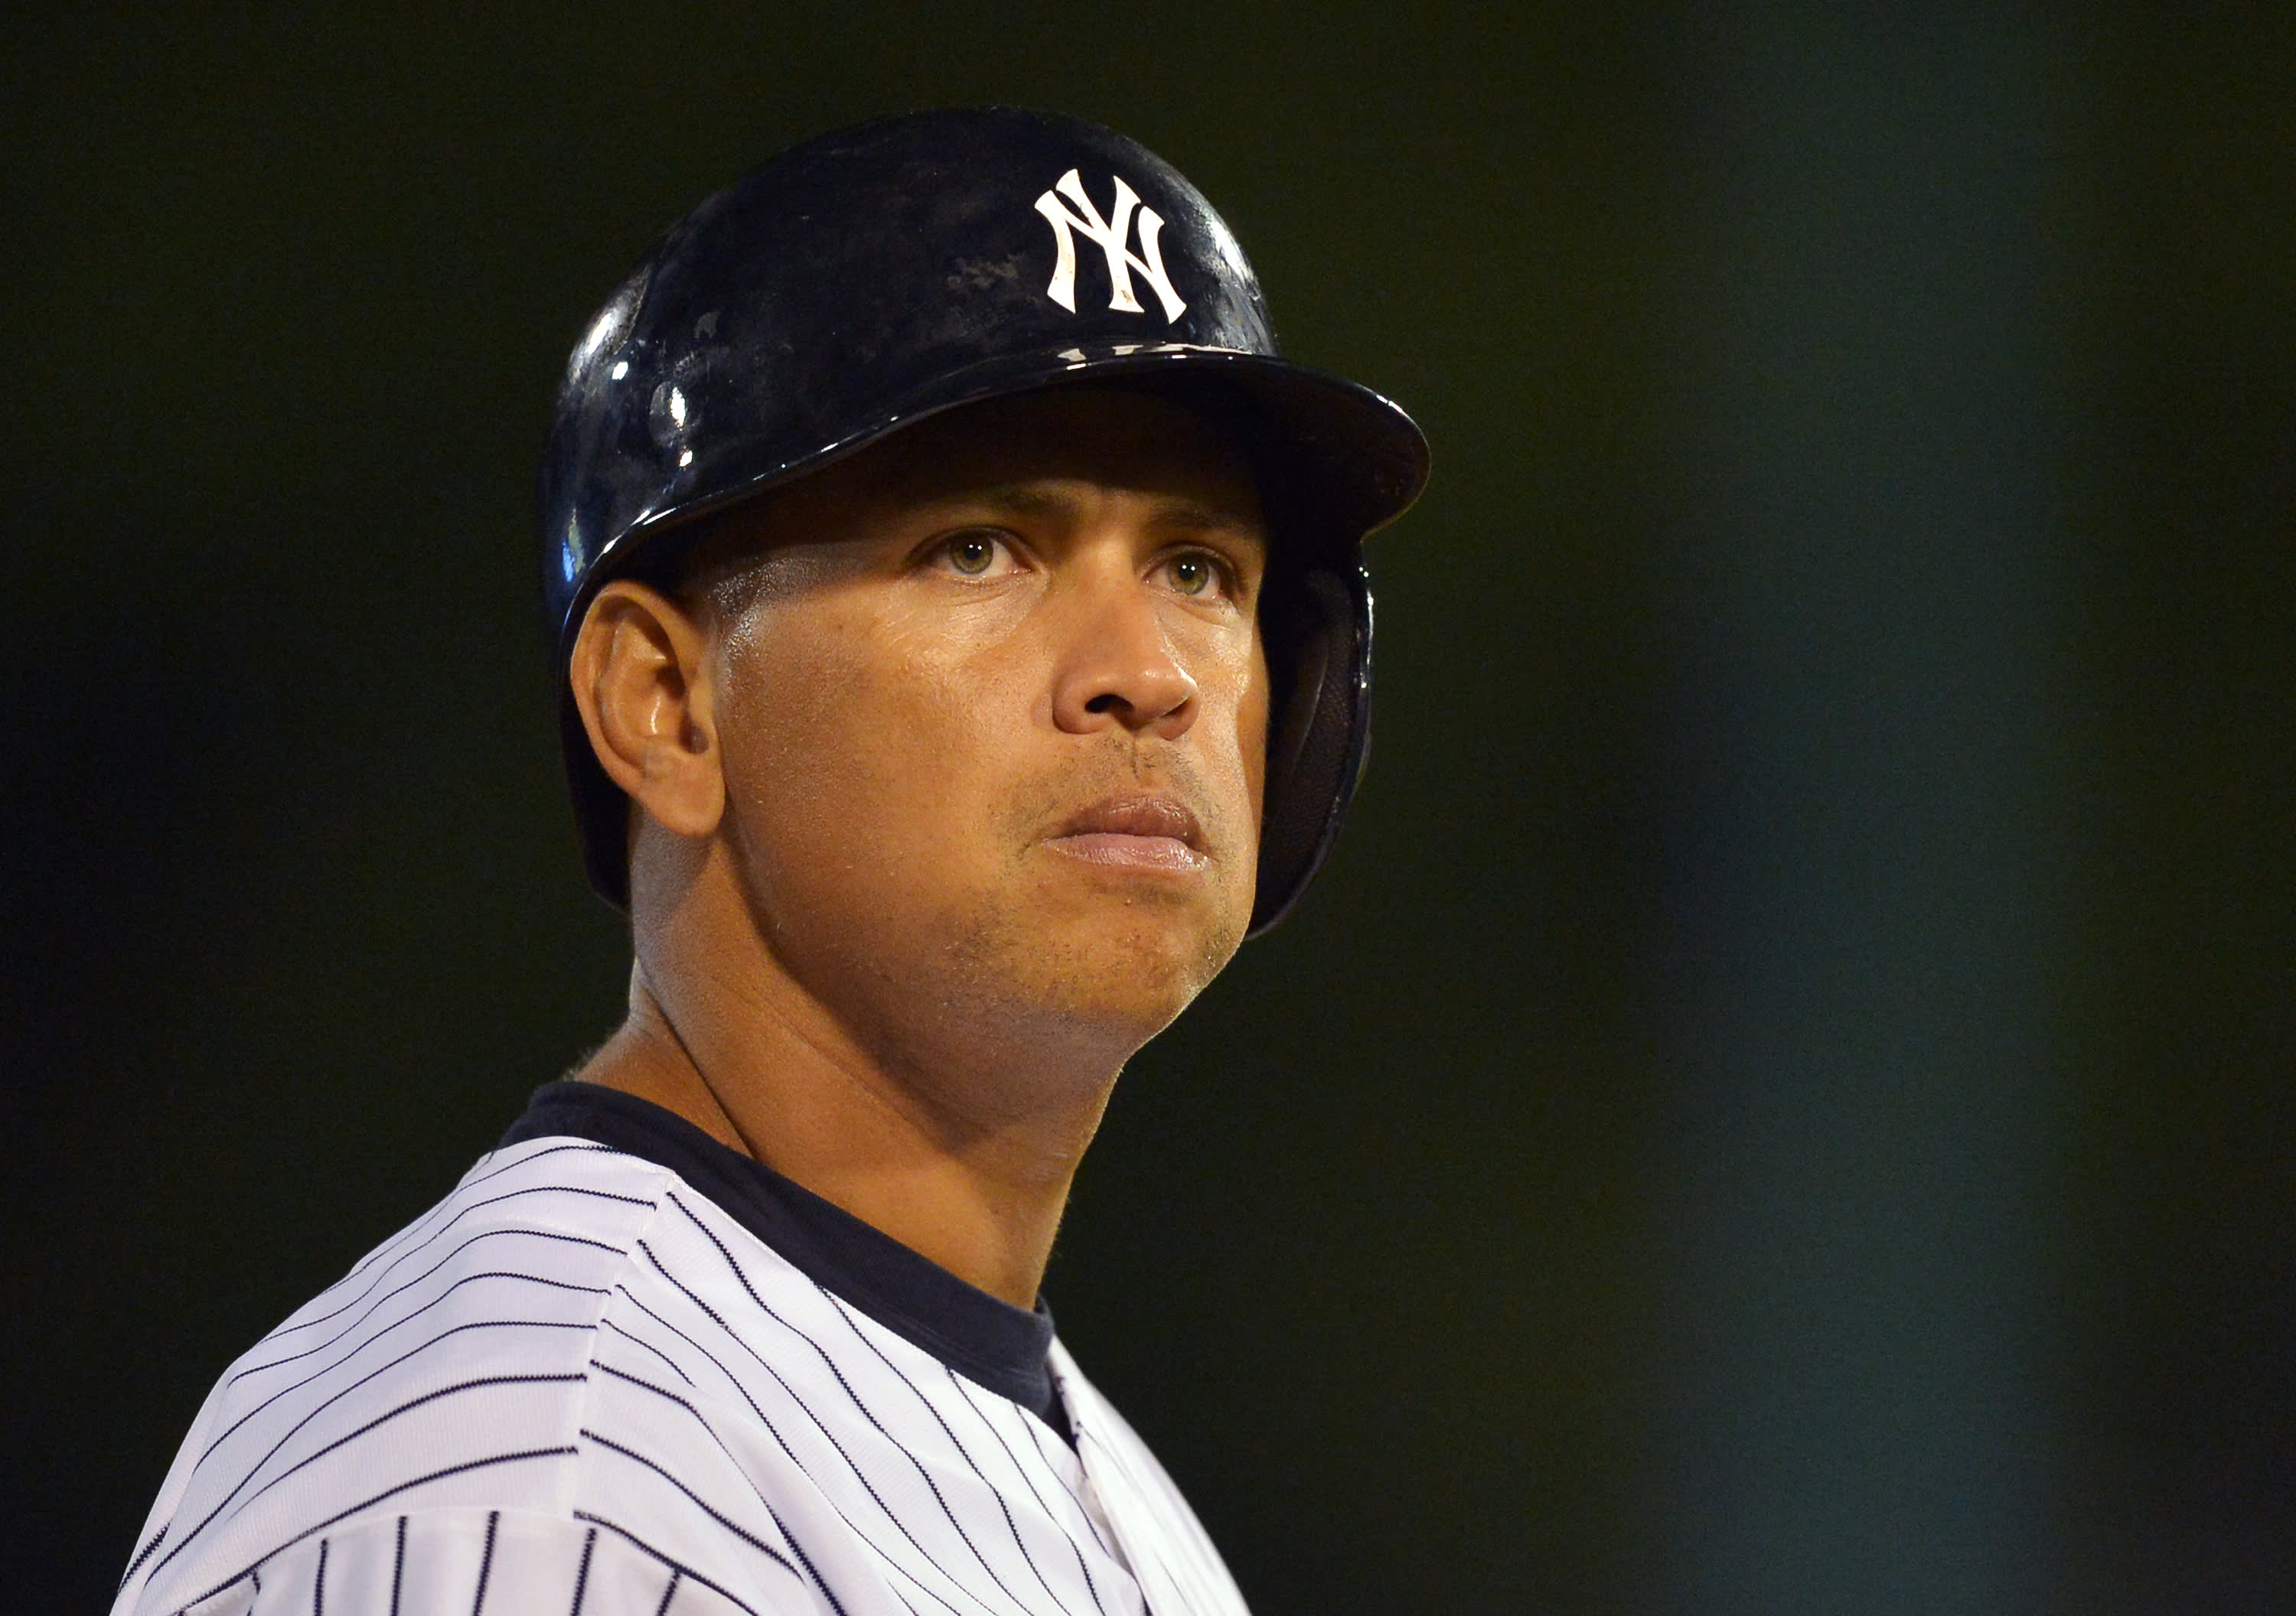 Report: A-Rod used banned PEDs with MLB's permission